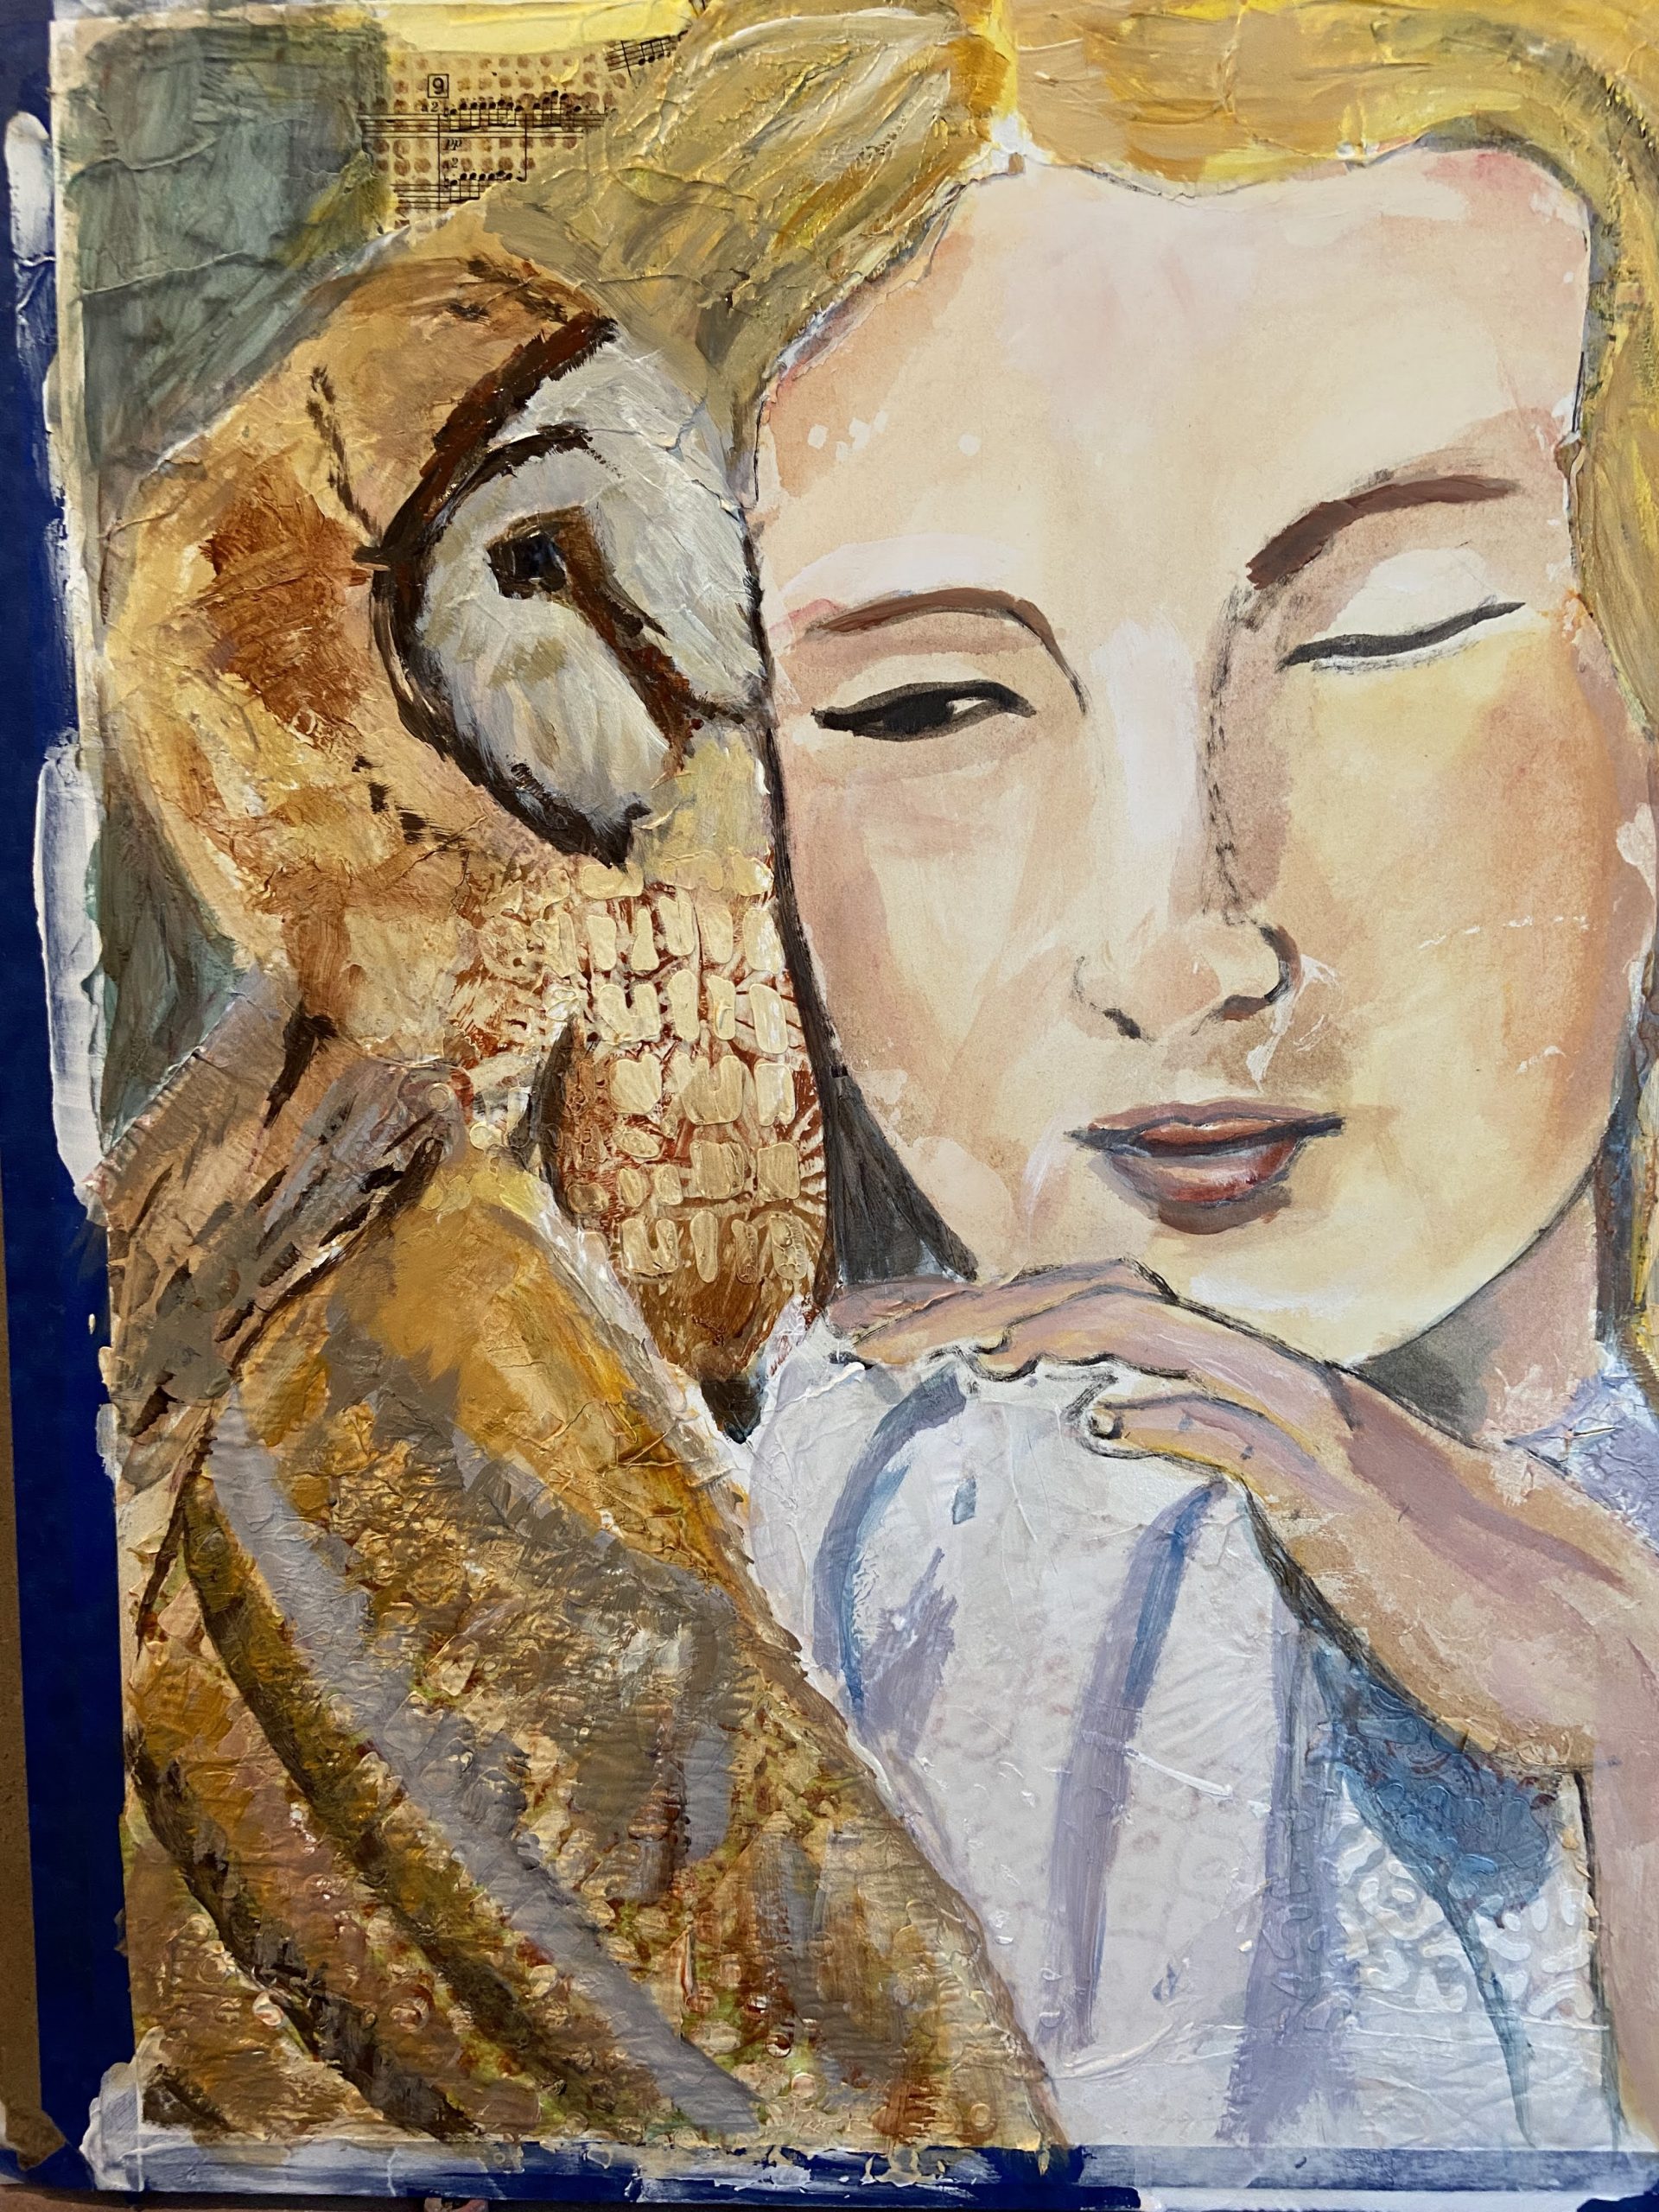 Painting of a girl with an owl on her shoulder using acrylic paint over collage paper